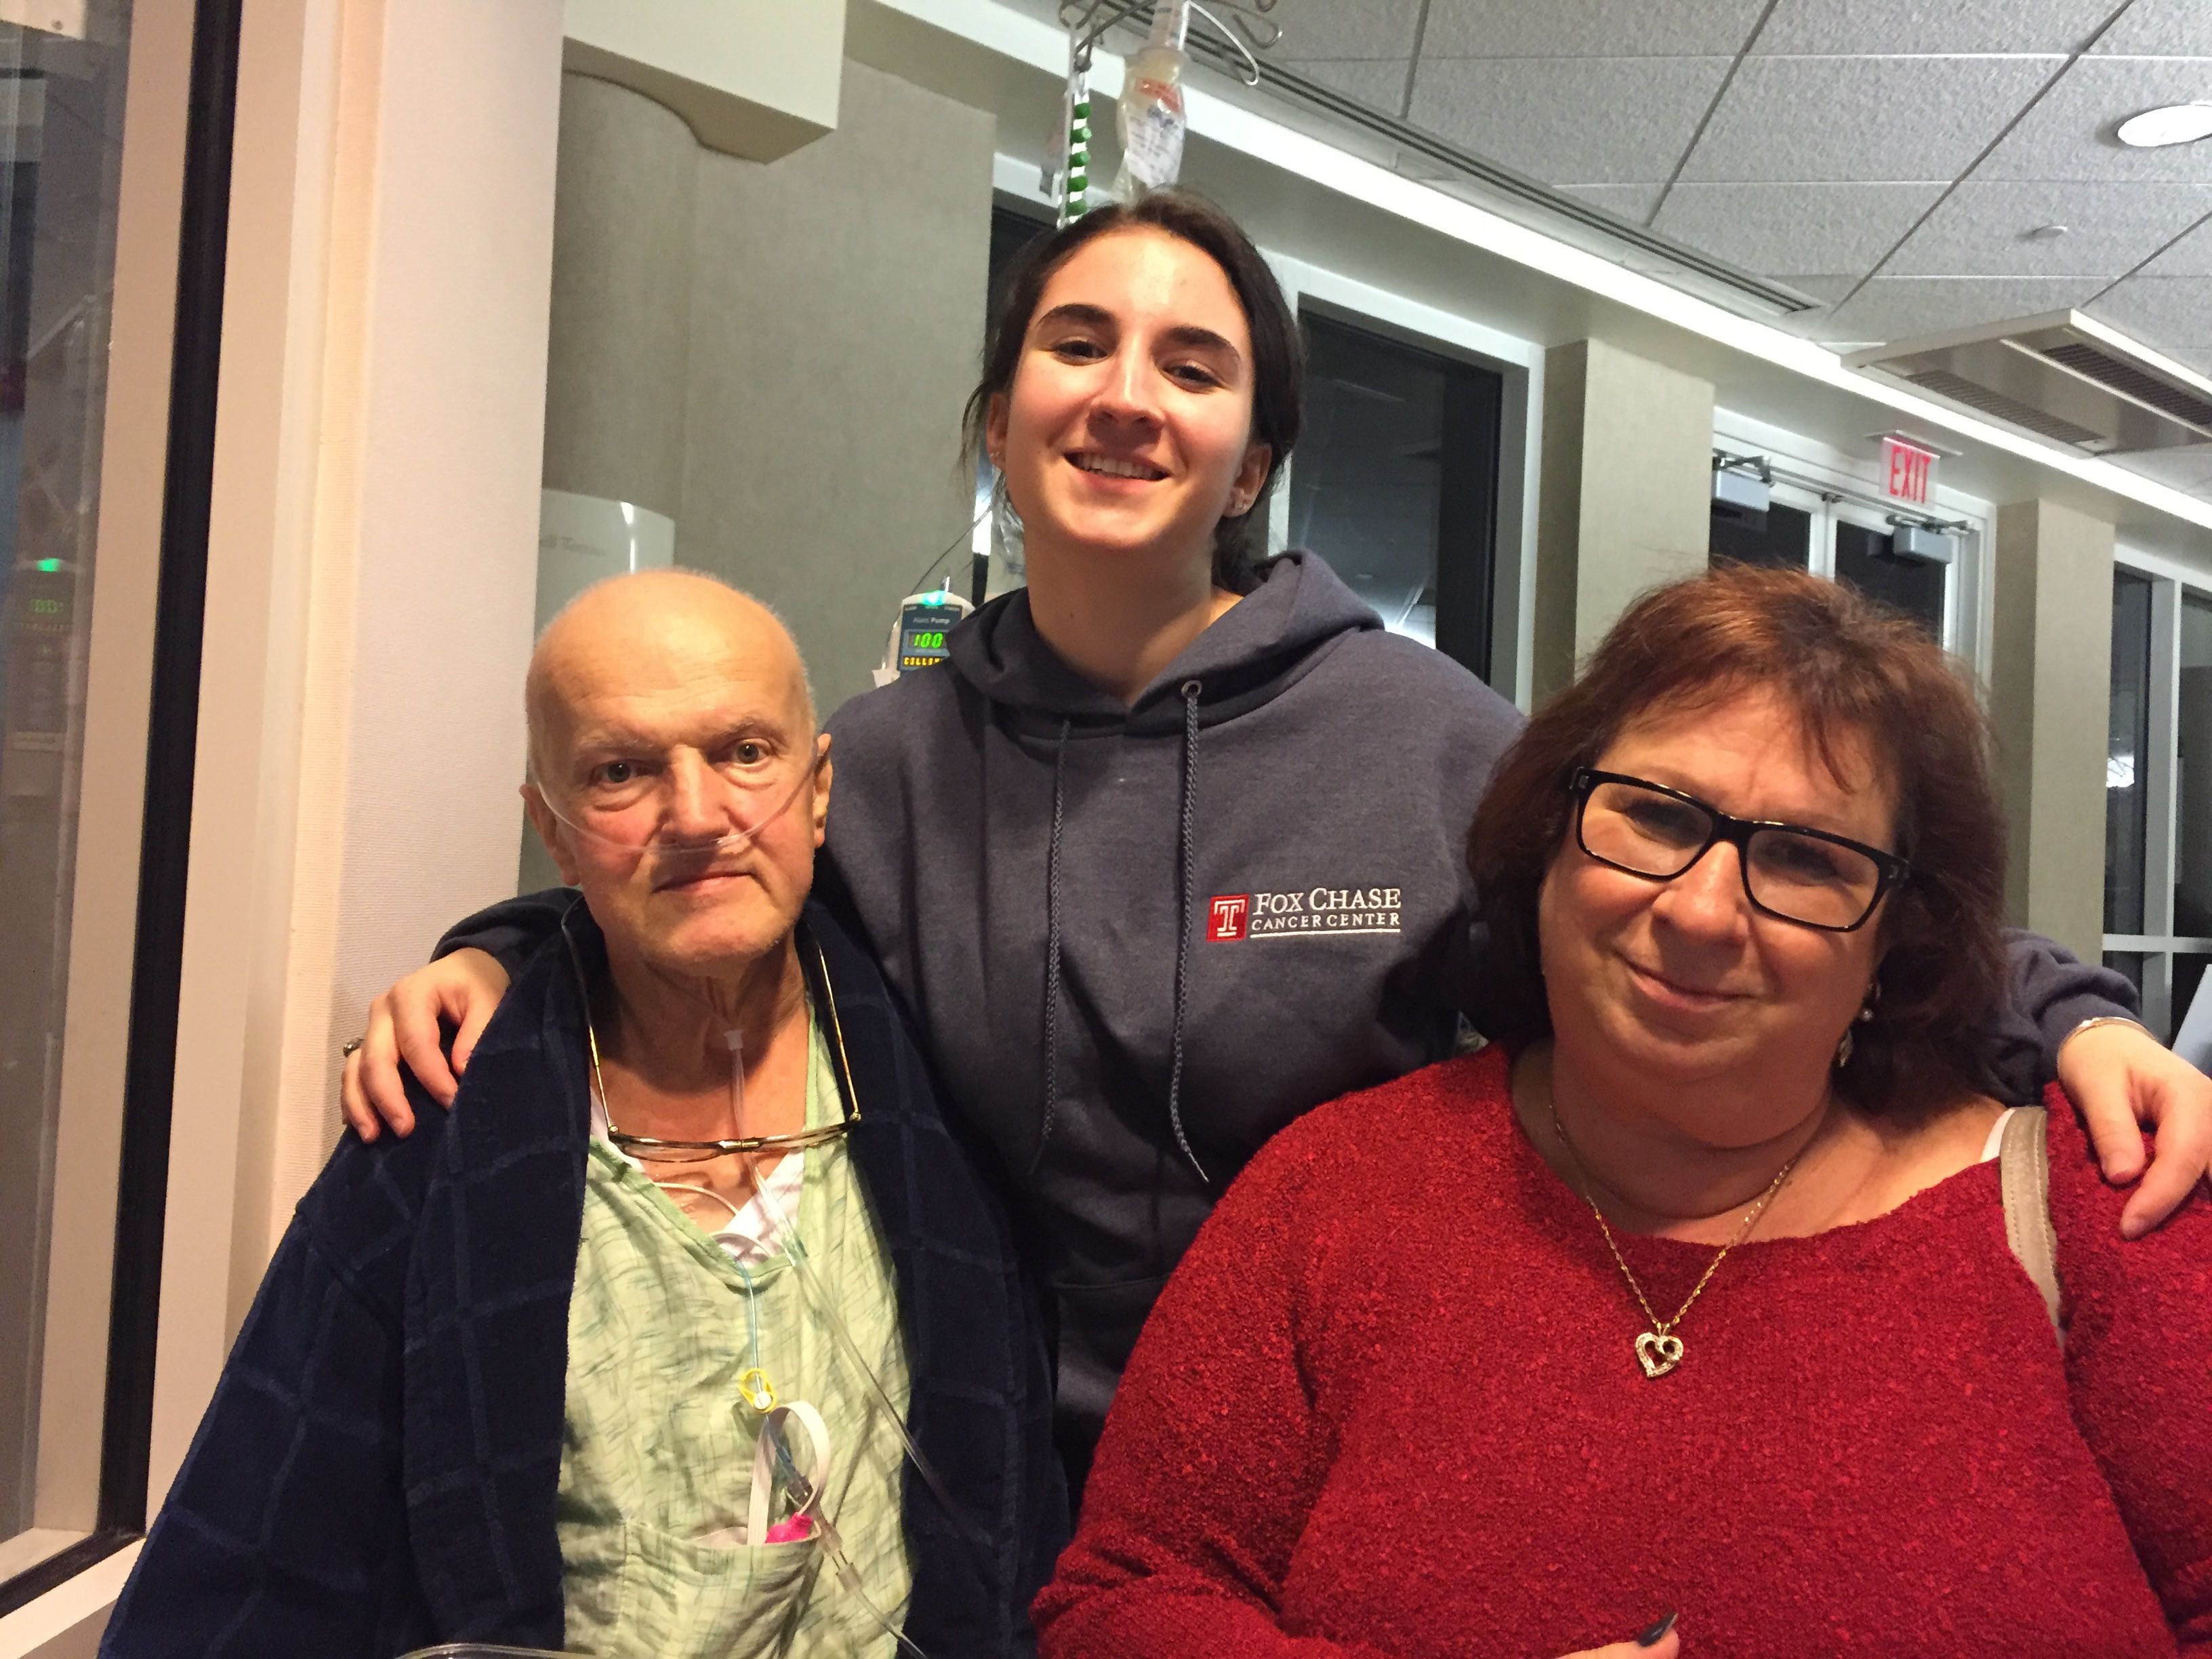 Joyce Vrbicek's husband Braco received treatment for lung cancer at Fox Chase. When she was diagnosed with lung nodules, it was her first choice to be treated here.